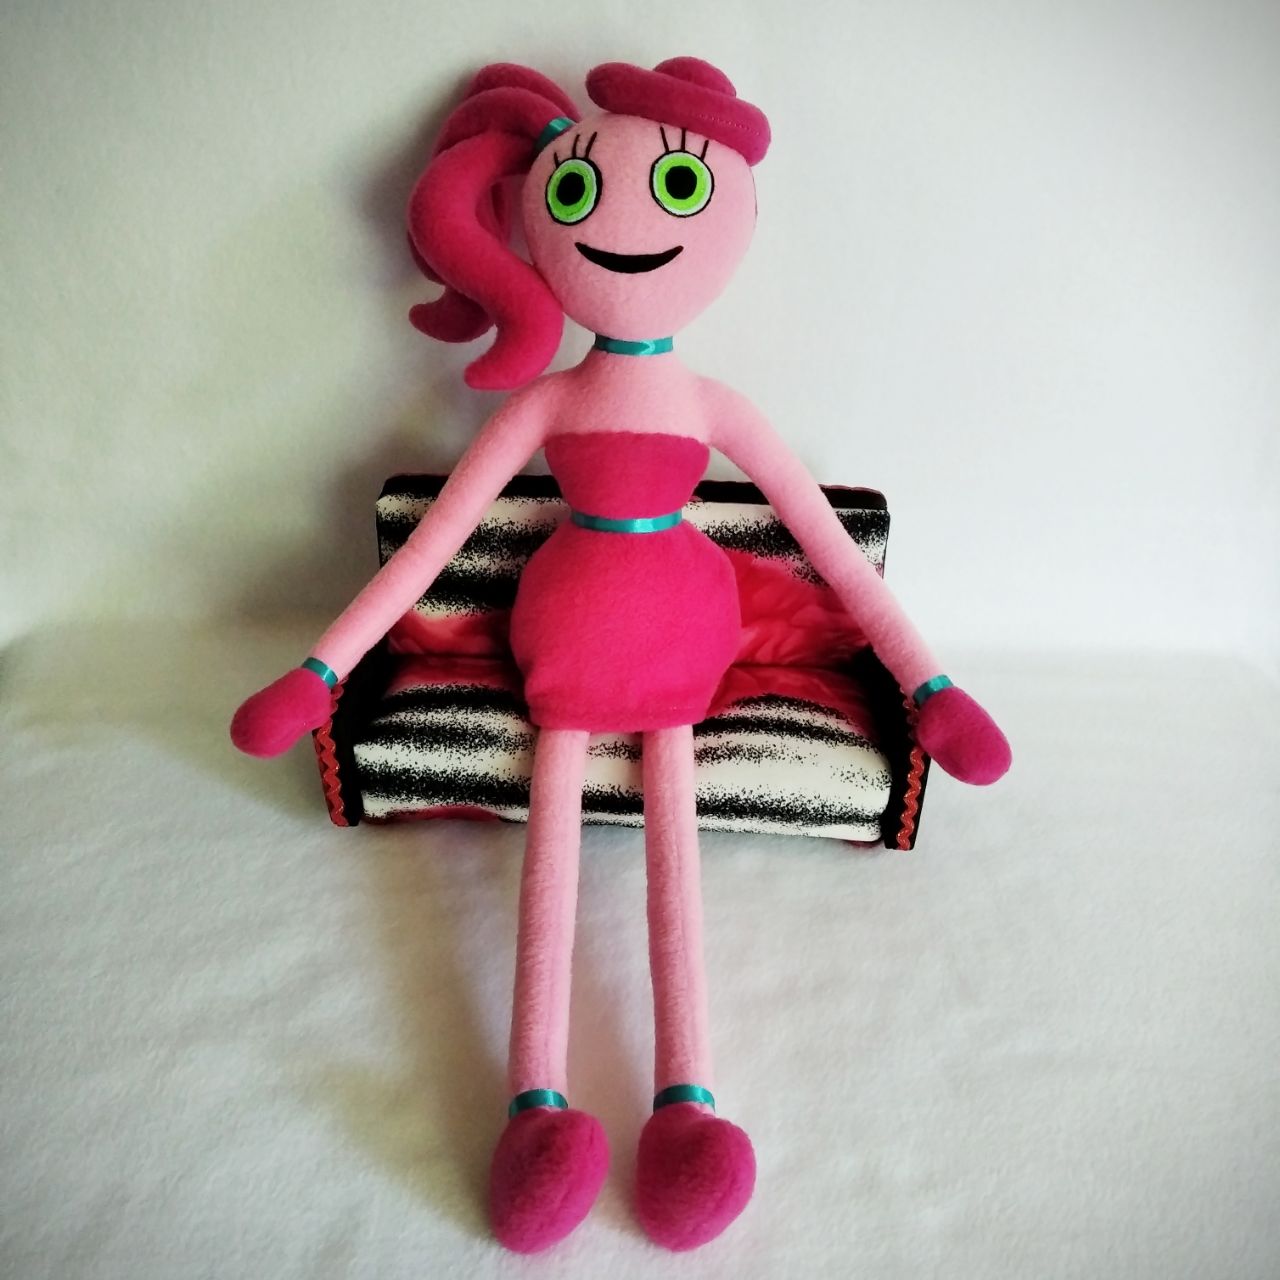 Comparing 3 Different Mommy Long Legs Plush Dolls 